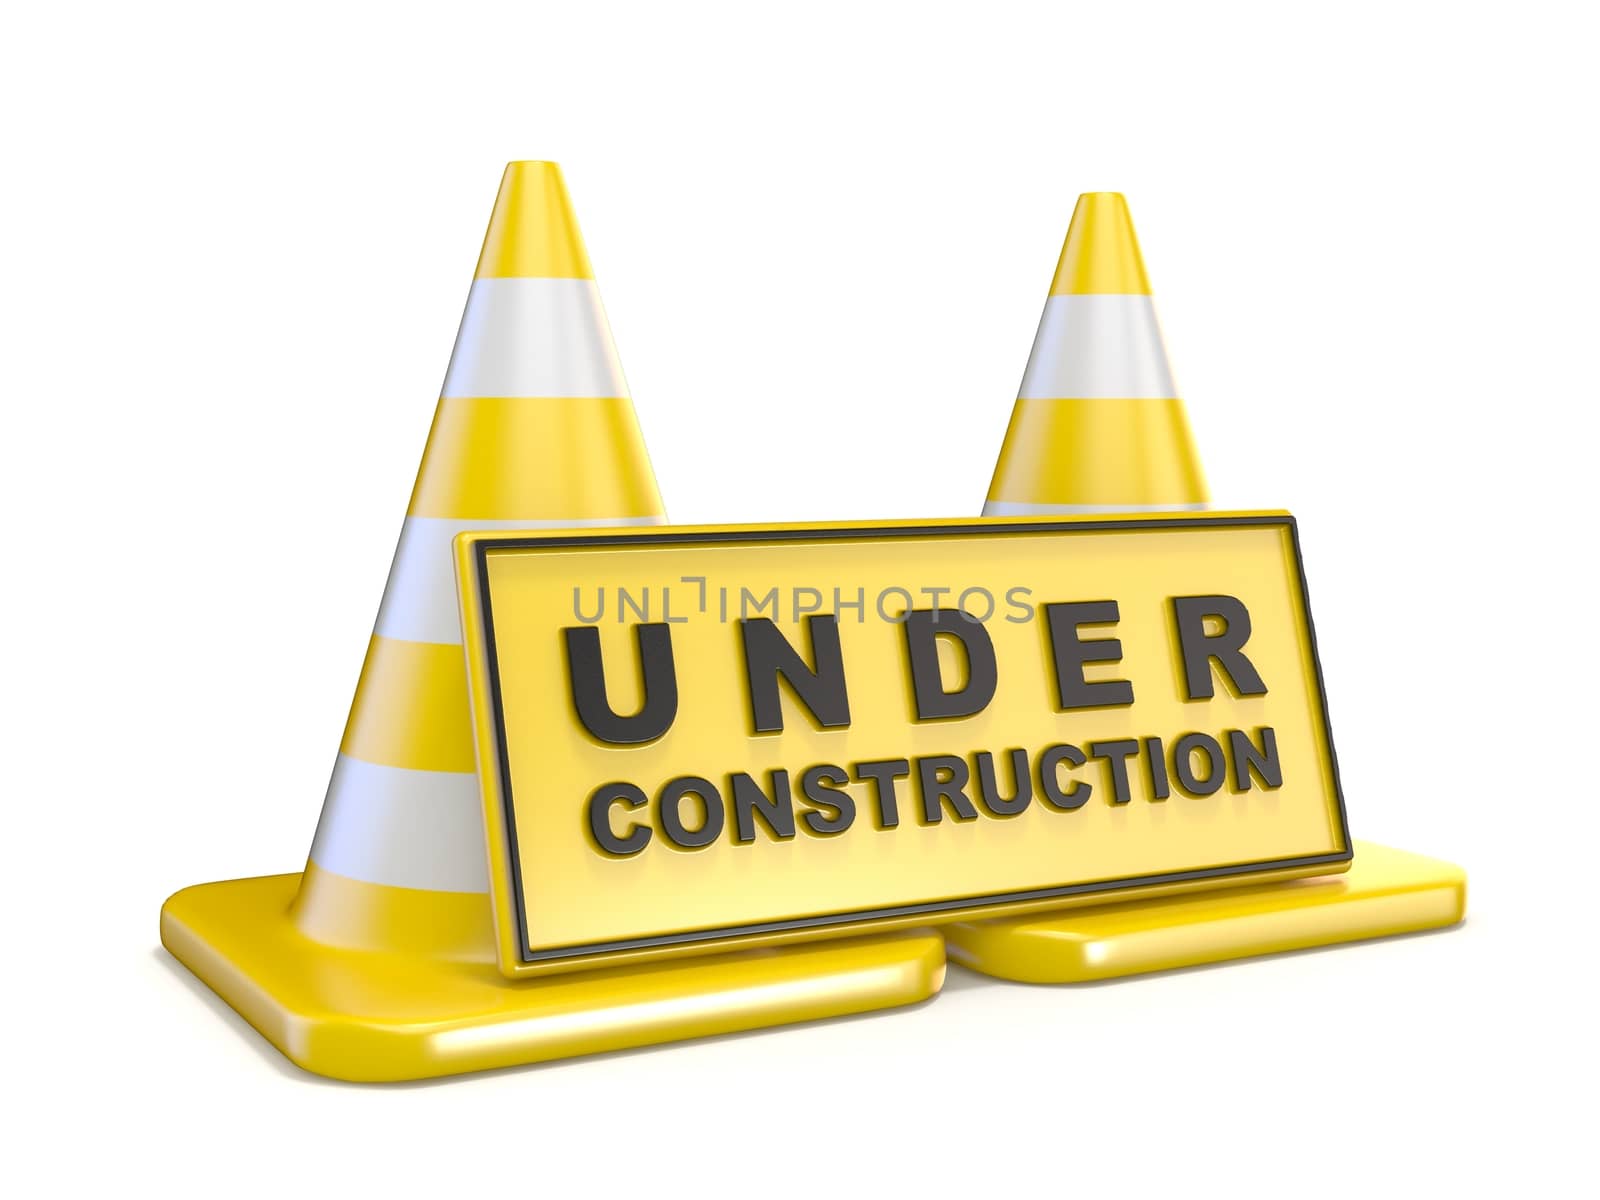 Yellow UNDER CONSTRUCTION sign and two road cones. 3D render illustration isolated on white background